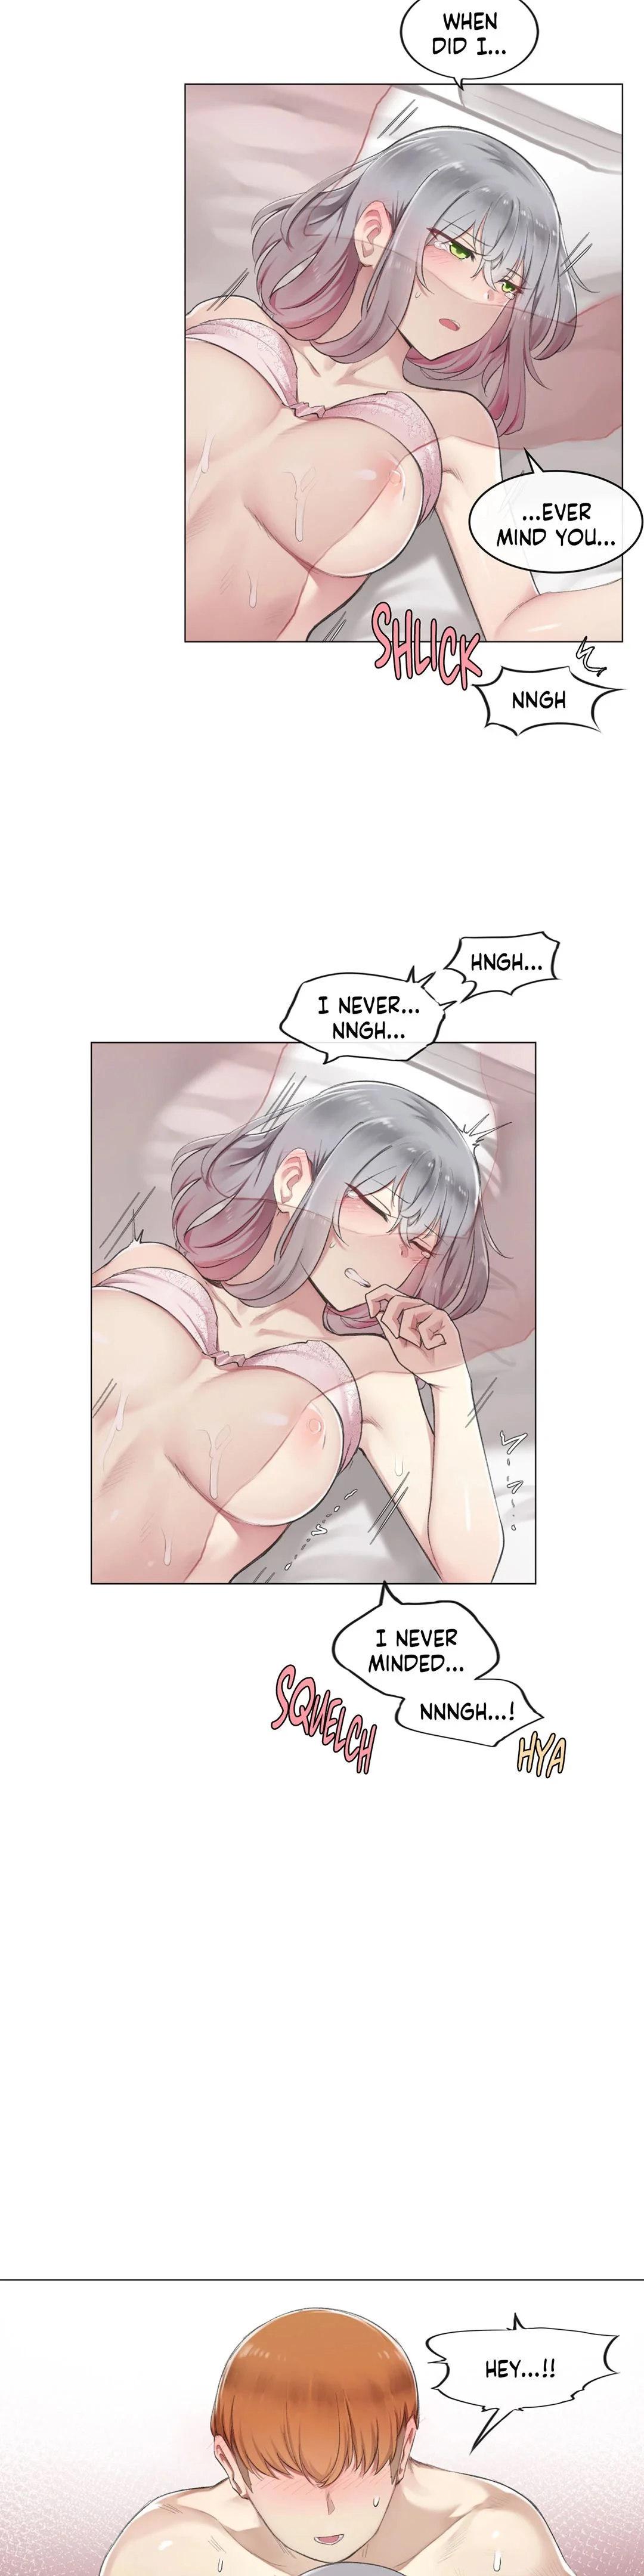 [Dumangoon, KONG_] Sexcape Room: Snap Off Ch.7/7 [English] [Manhwa PDF] Completed 107